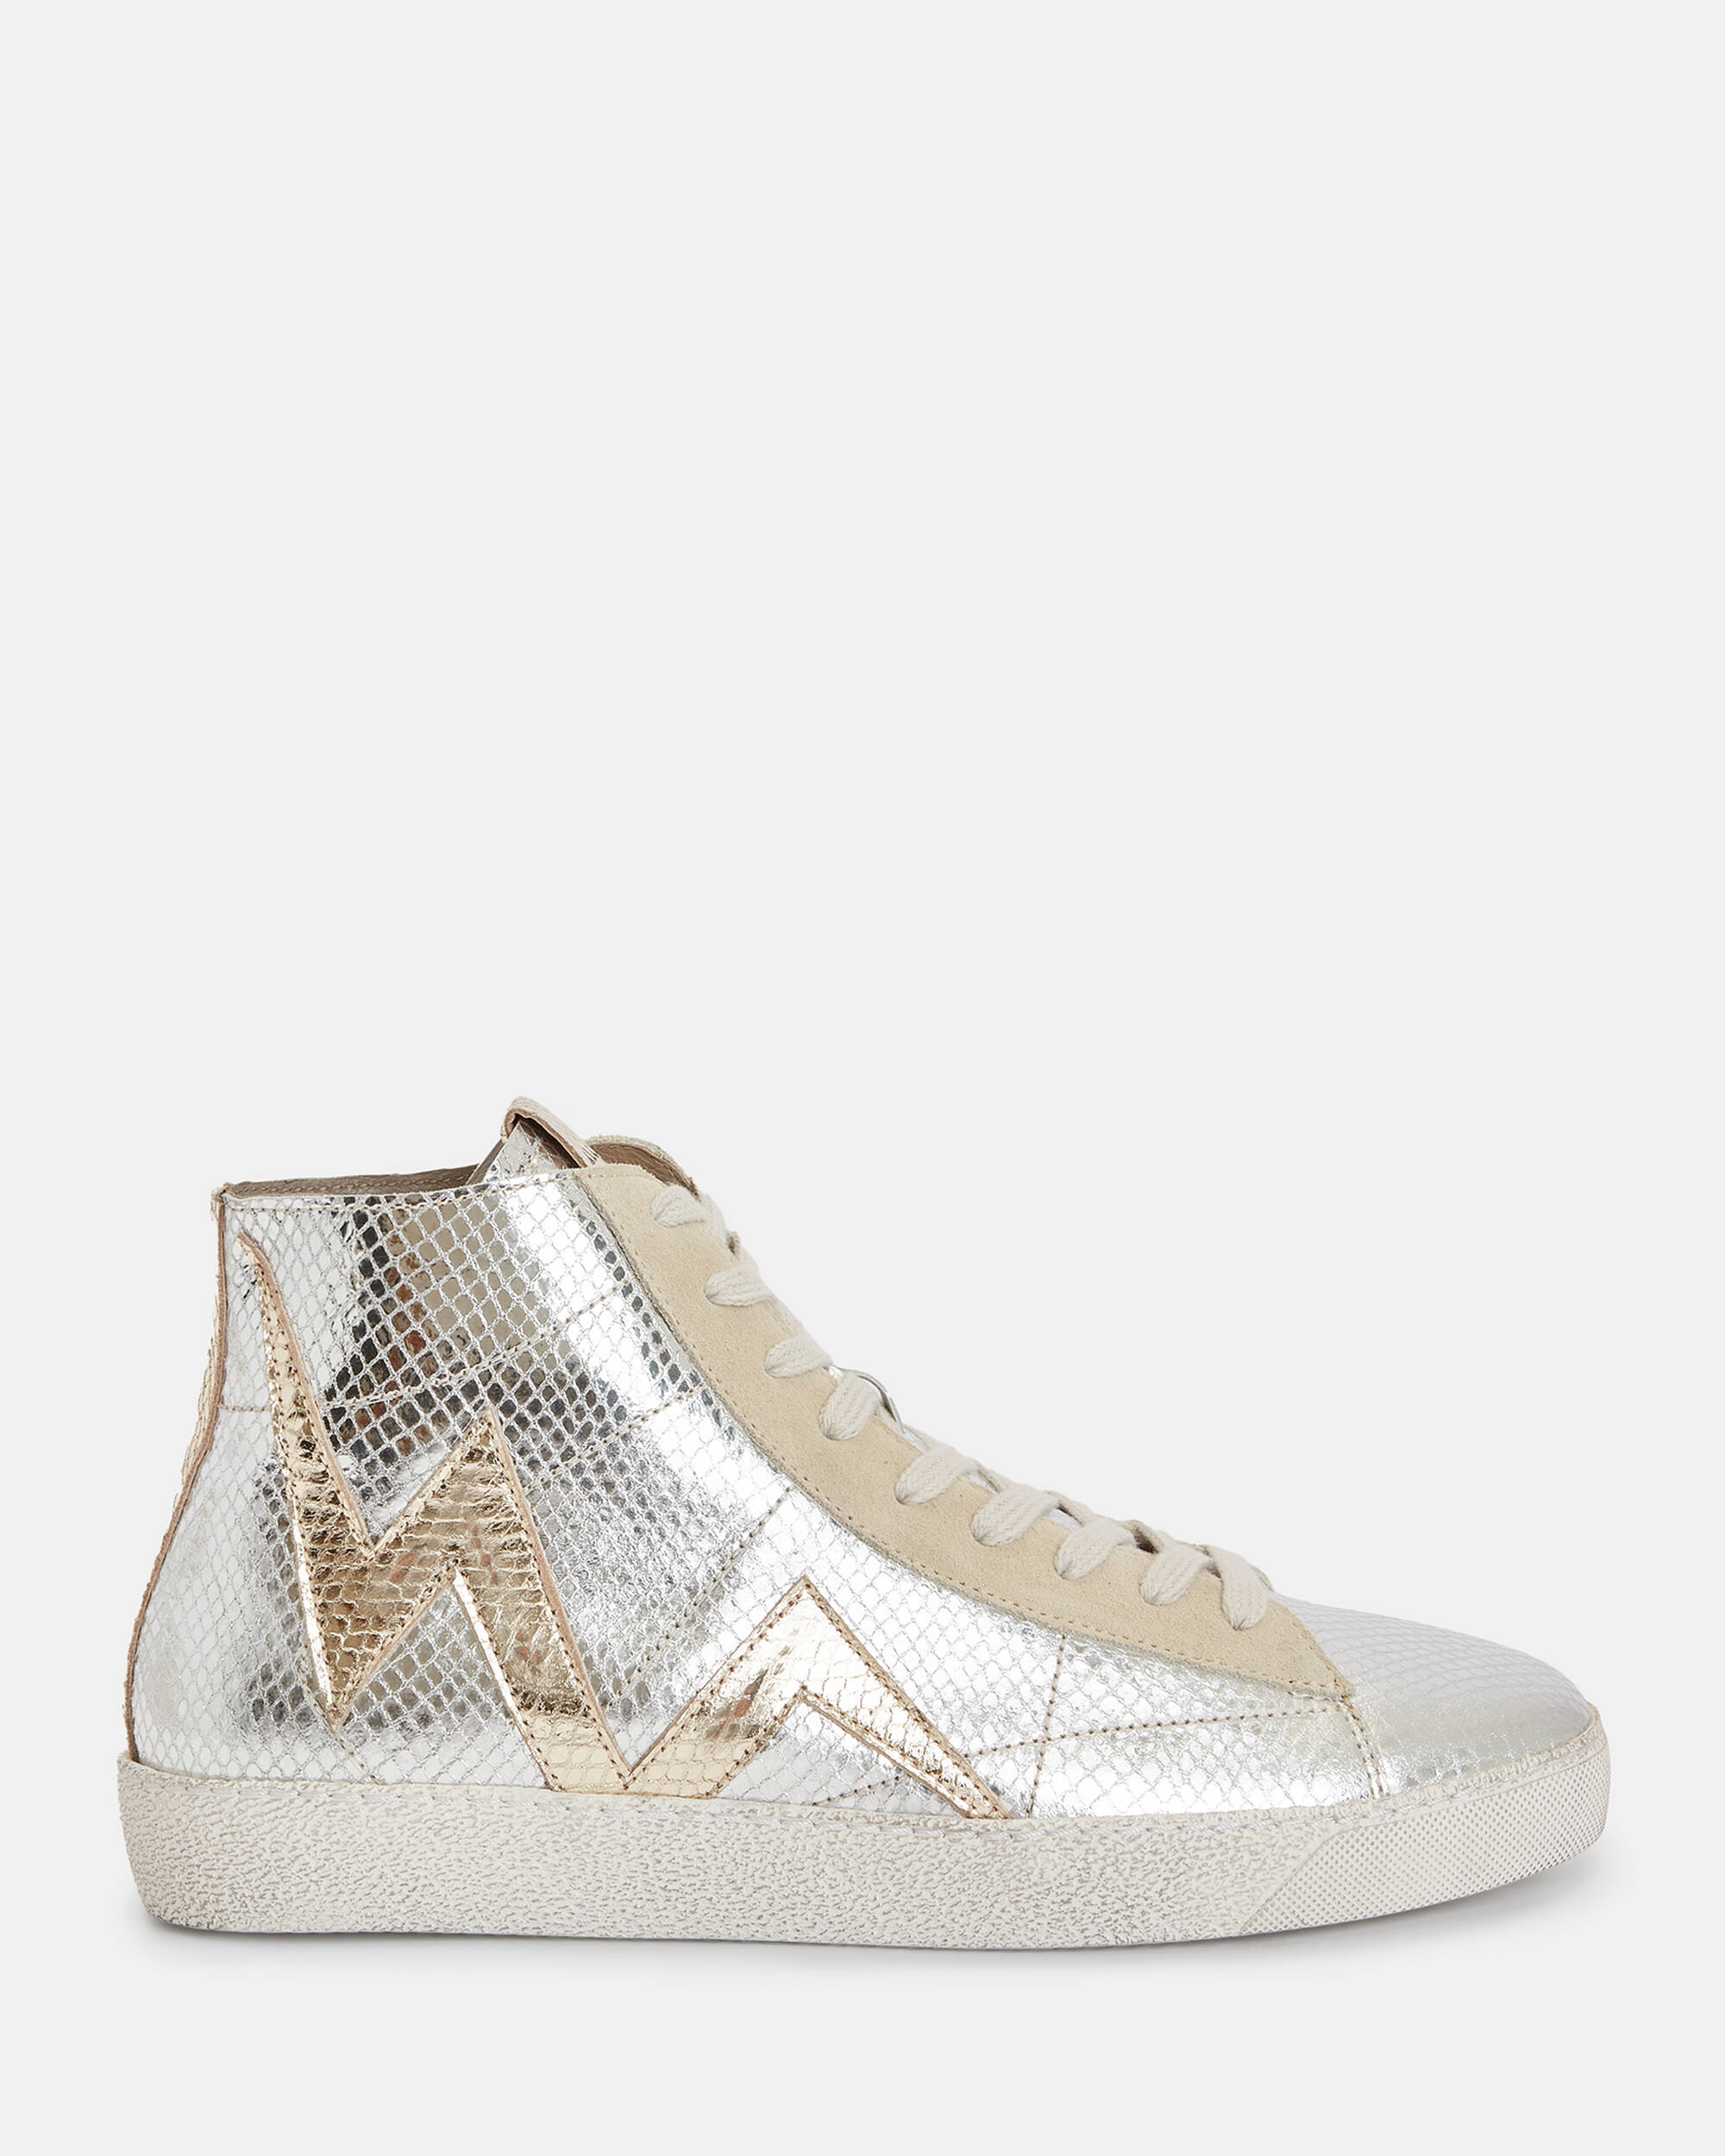 Tundy Bolt Metallic Leather Sneakers  large image number 1